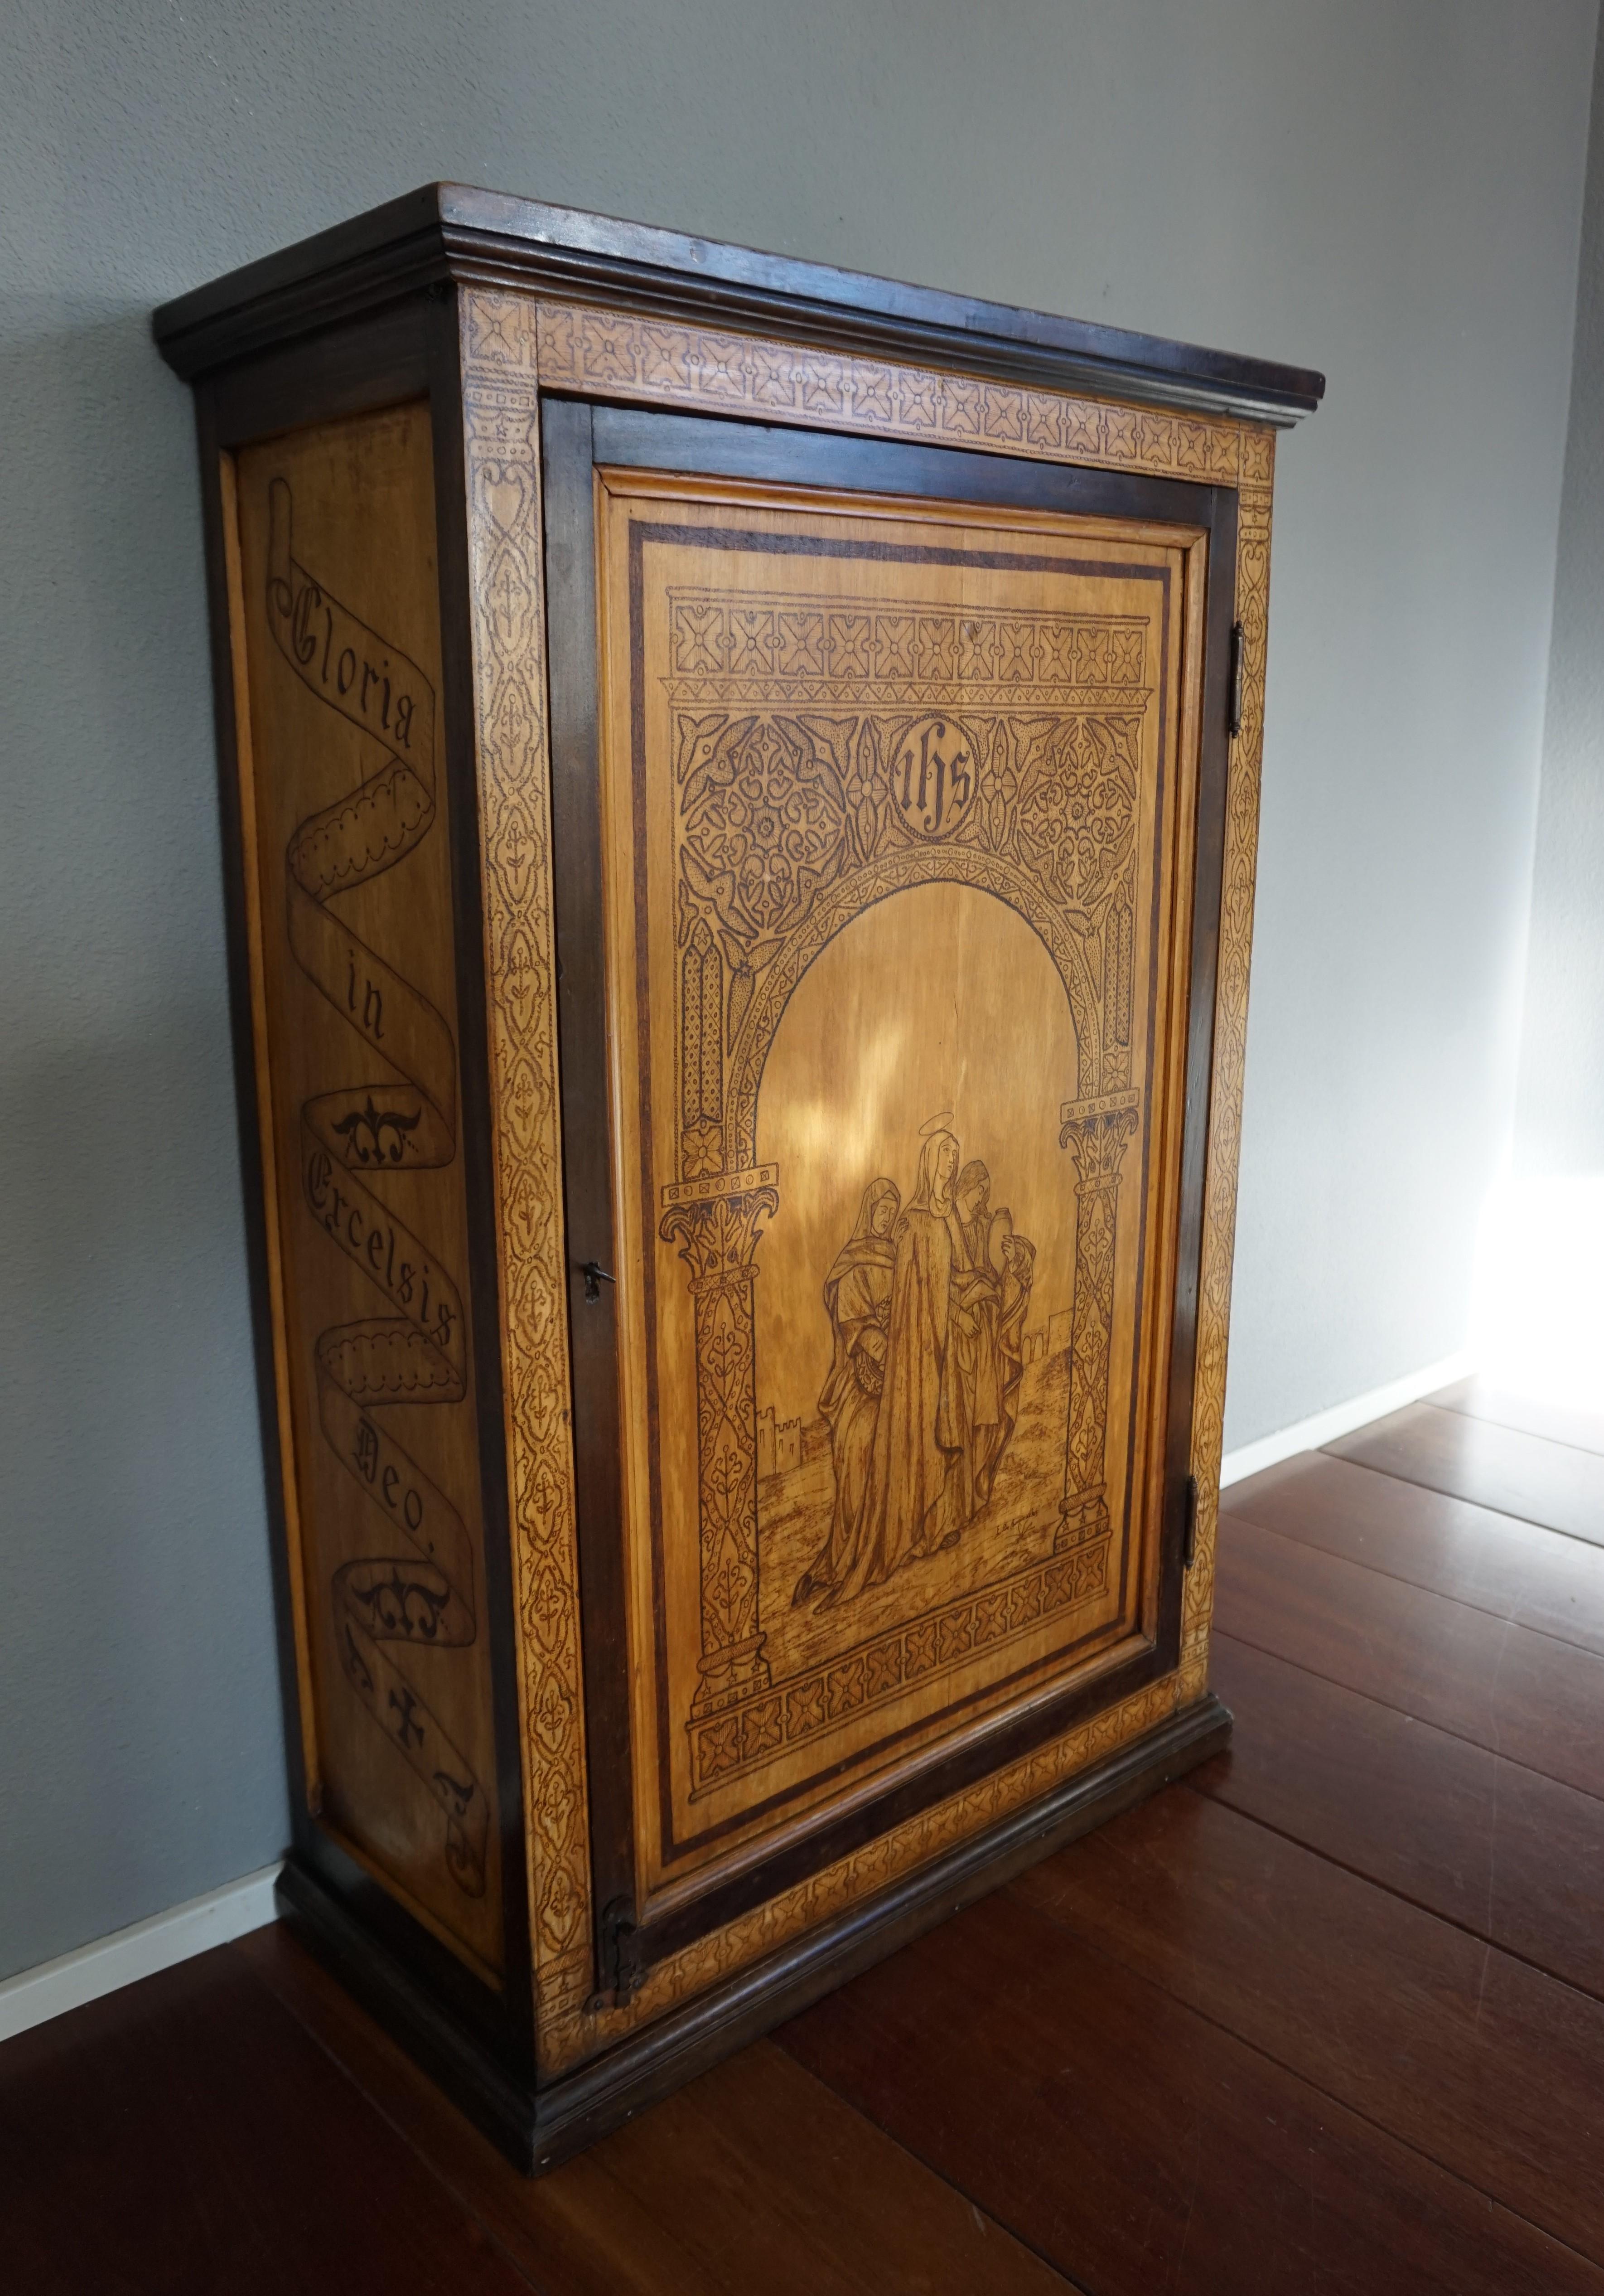 Gothic Revival Antique Church Wall Cabinet w. Biblical Pokerwork Scene of Mary & Bible Text